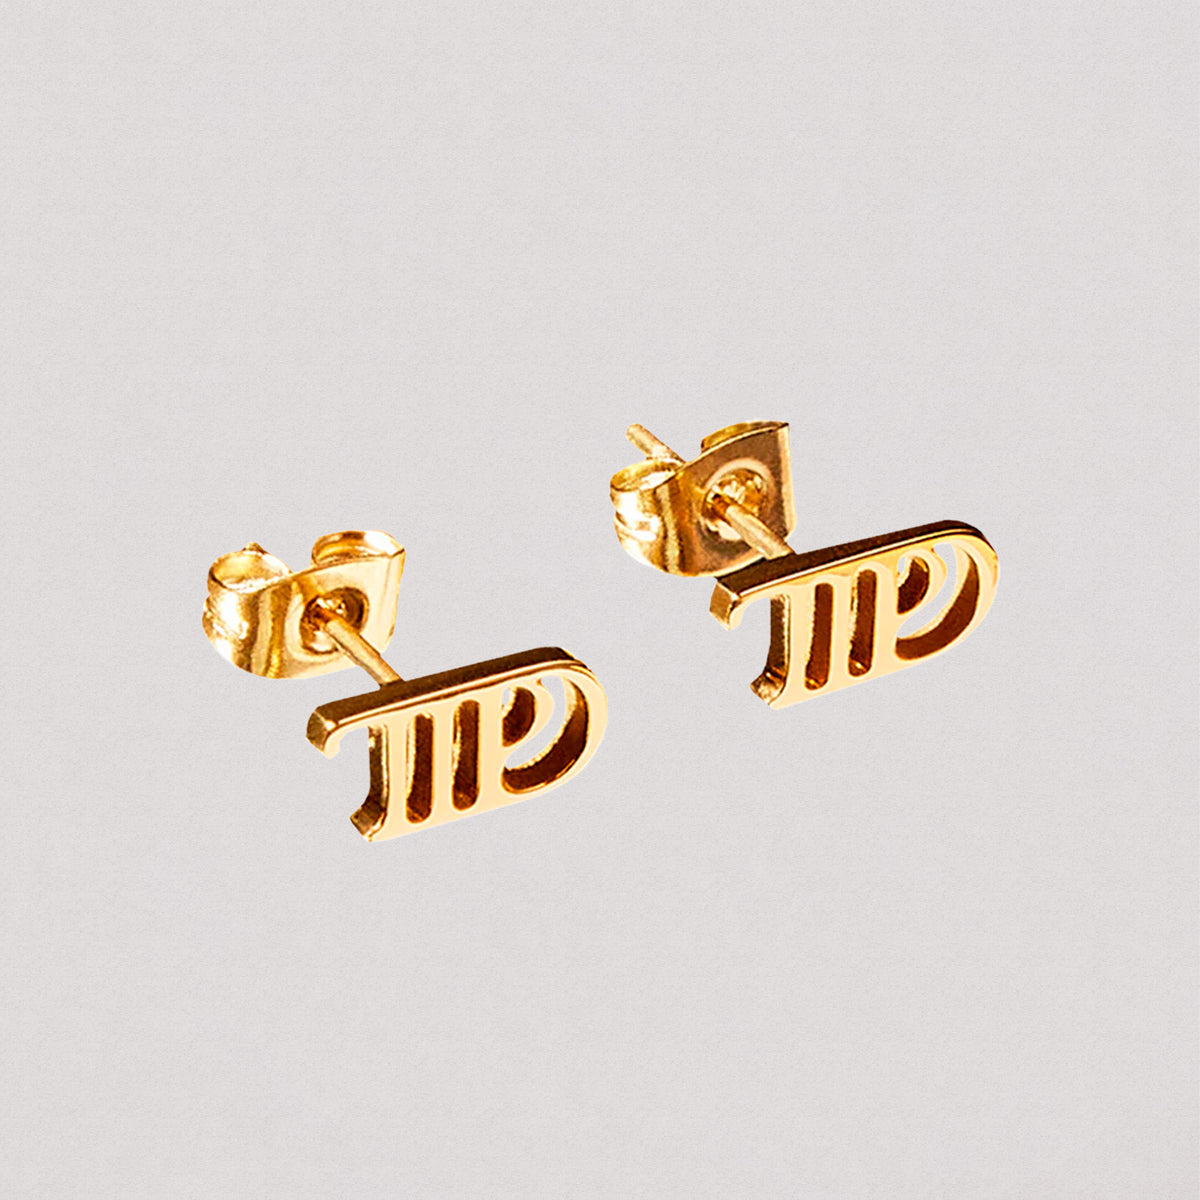 Taylor Swift - The Tortured Poets Department Earrings